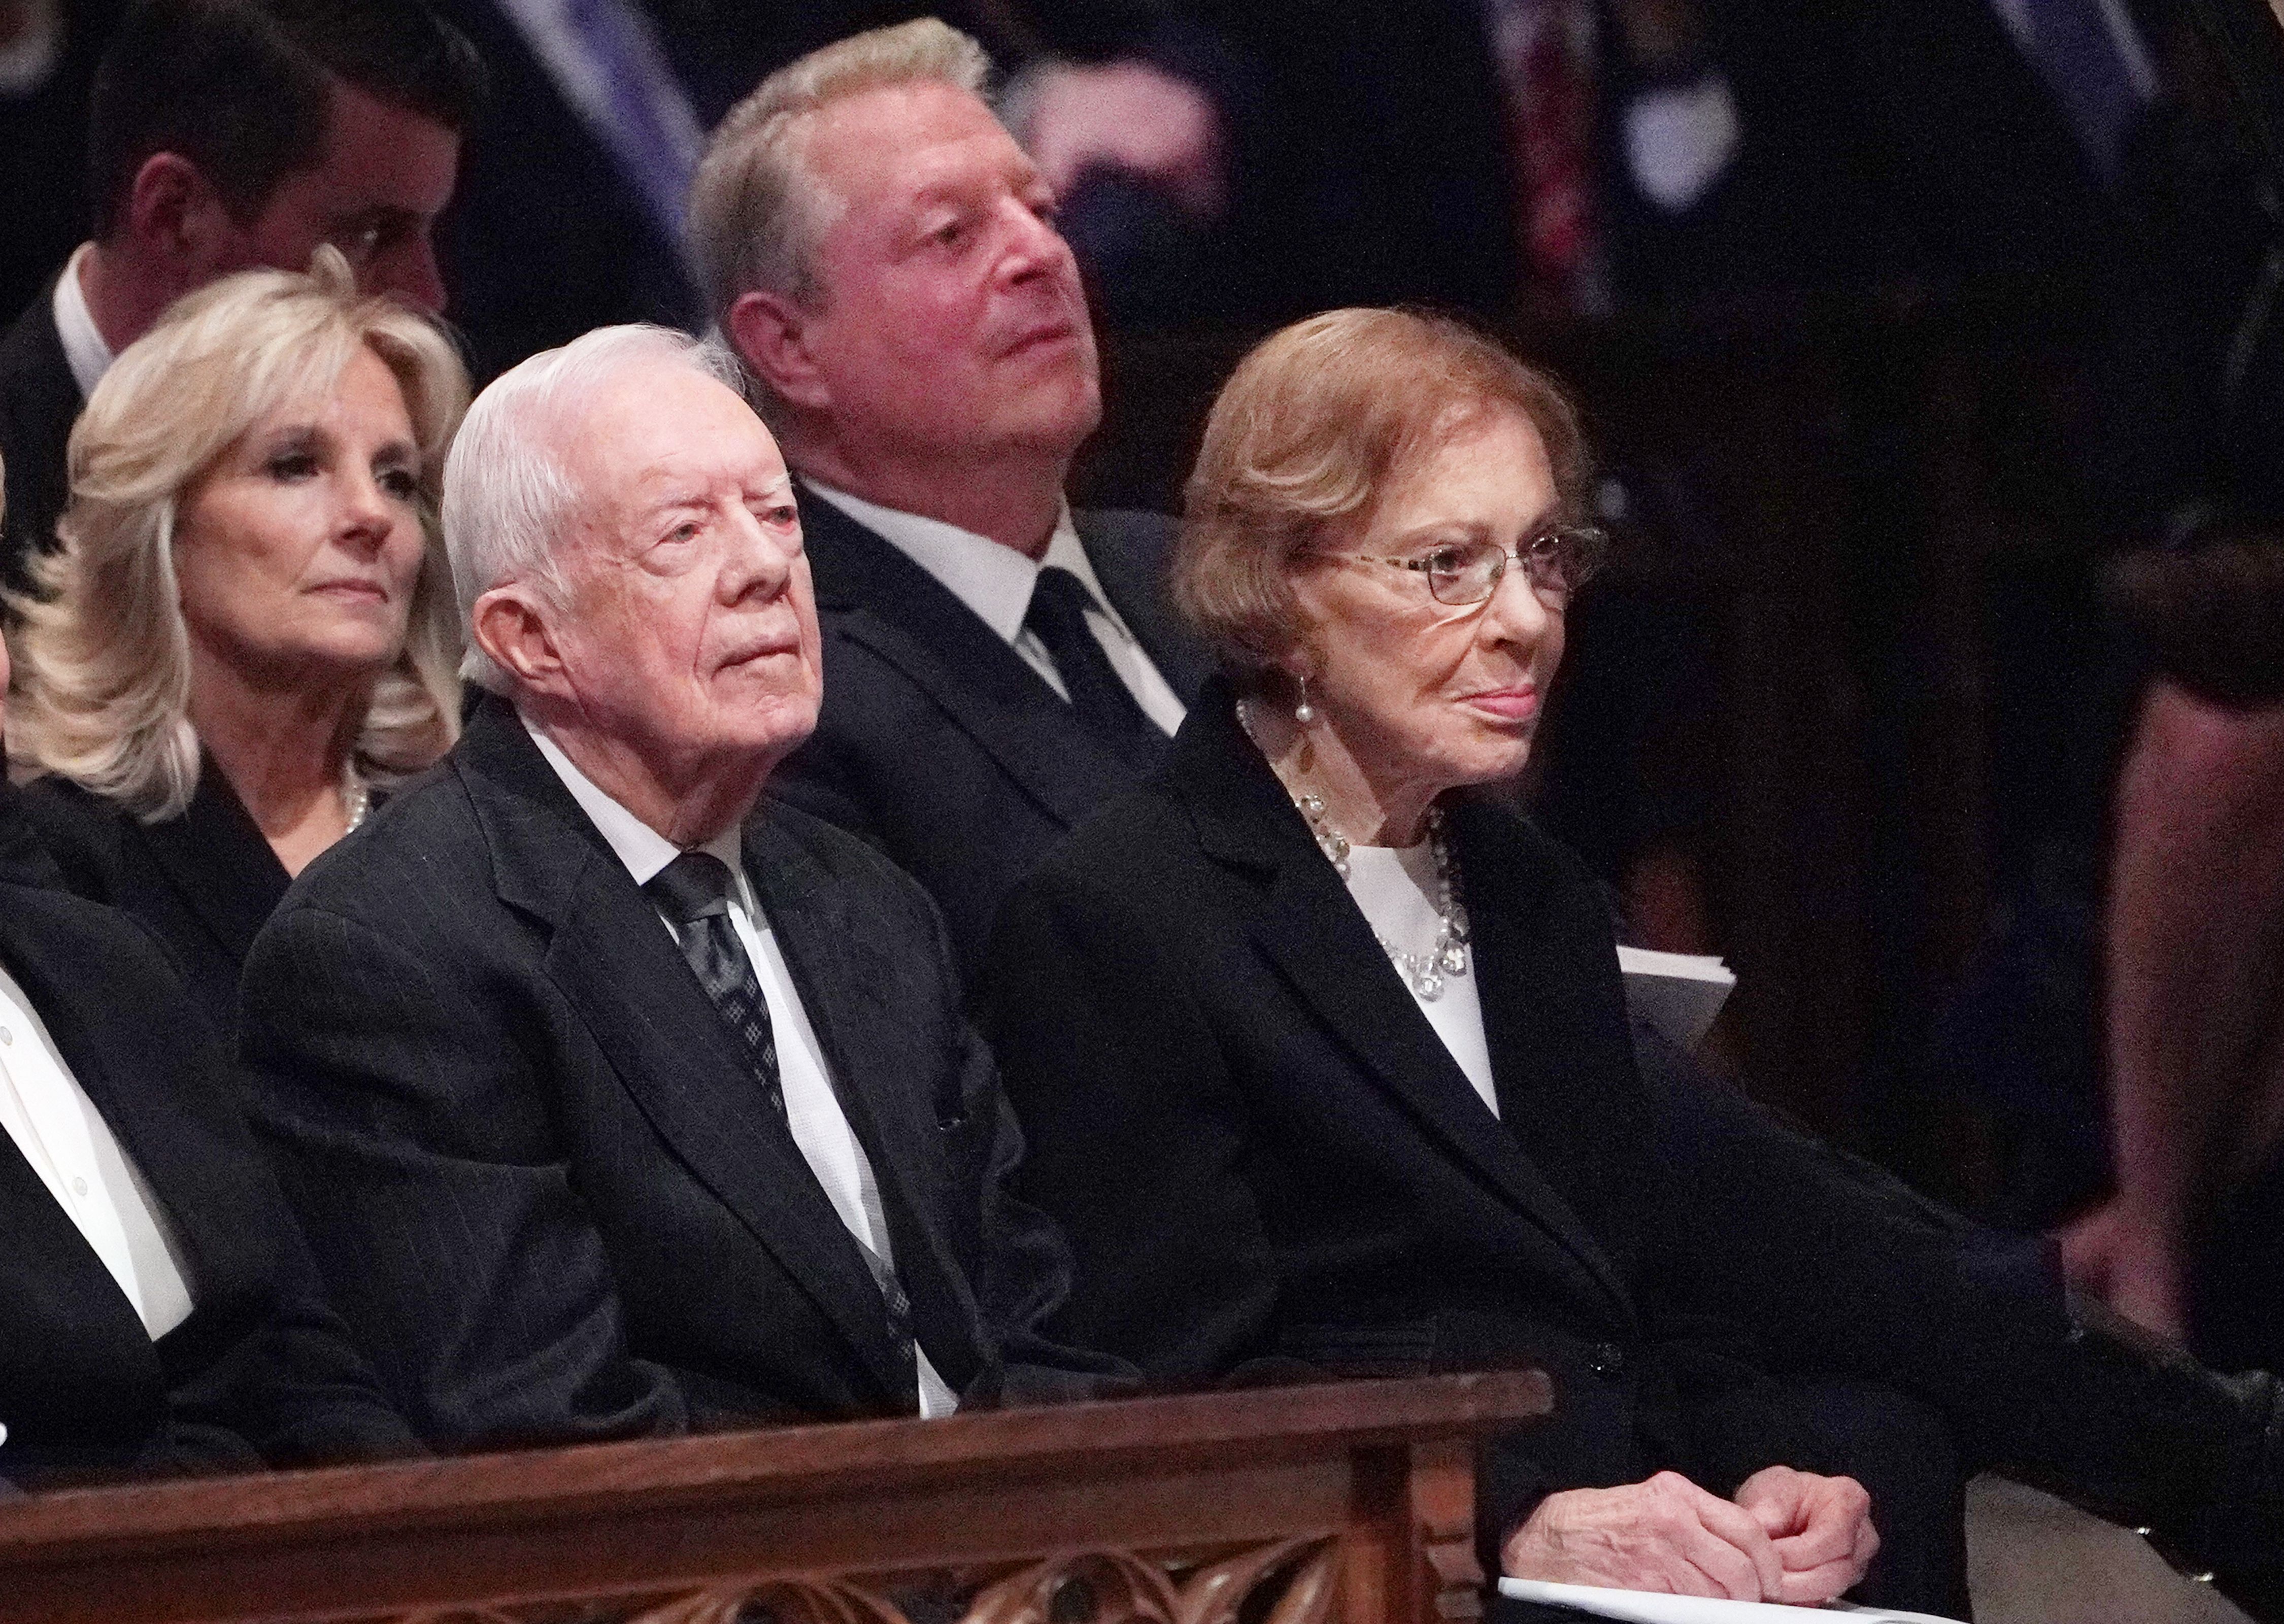 Former US President Jimmy Carter and his wife Rosalynn Carter at the funeral service for Former US President George H. W. Bush in Washington, DC, on December 5, 2018 | Source: Getty Images